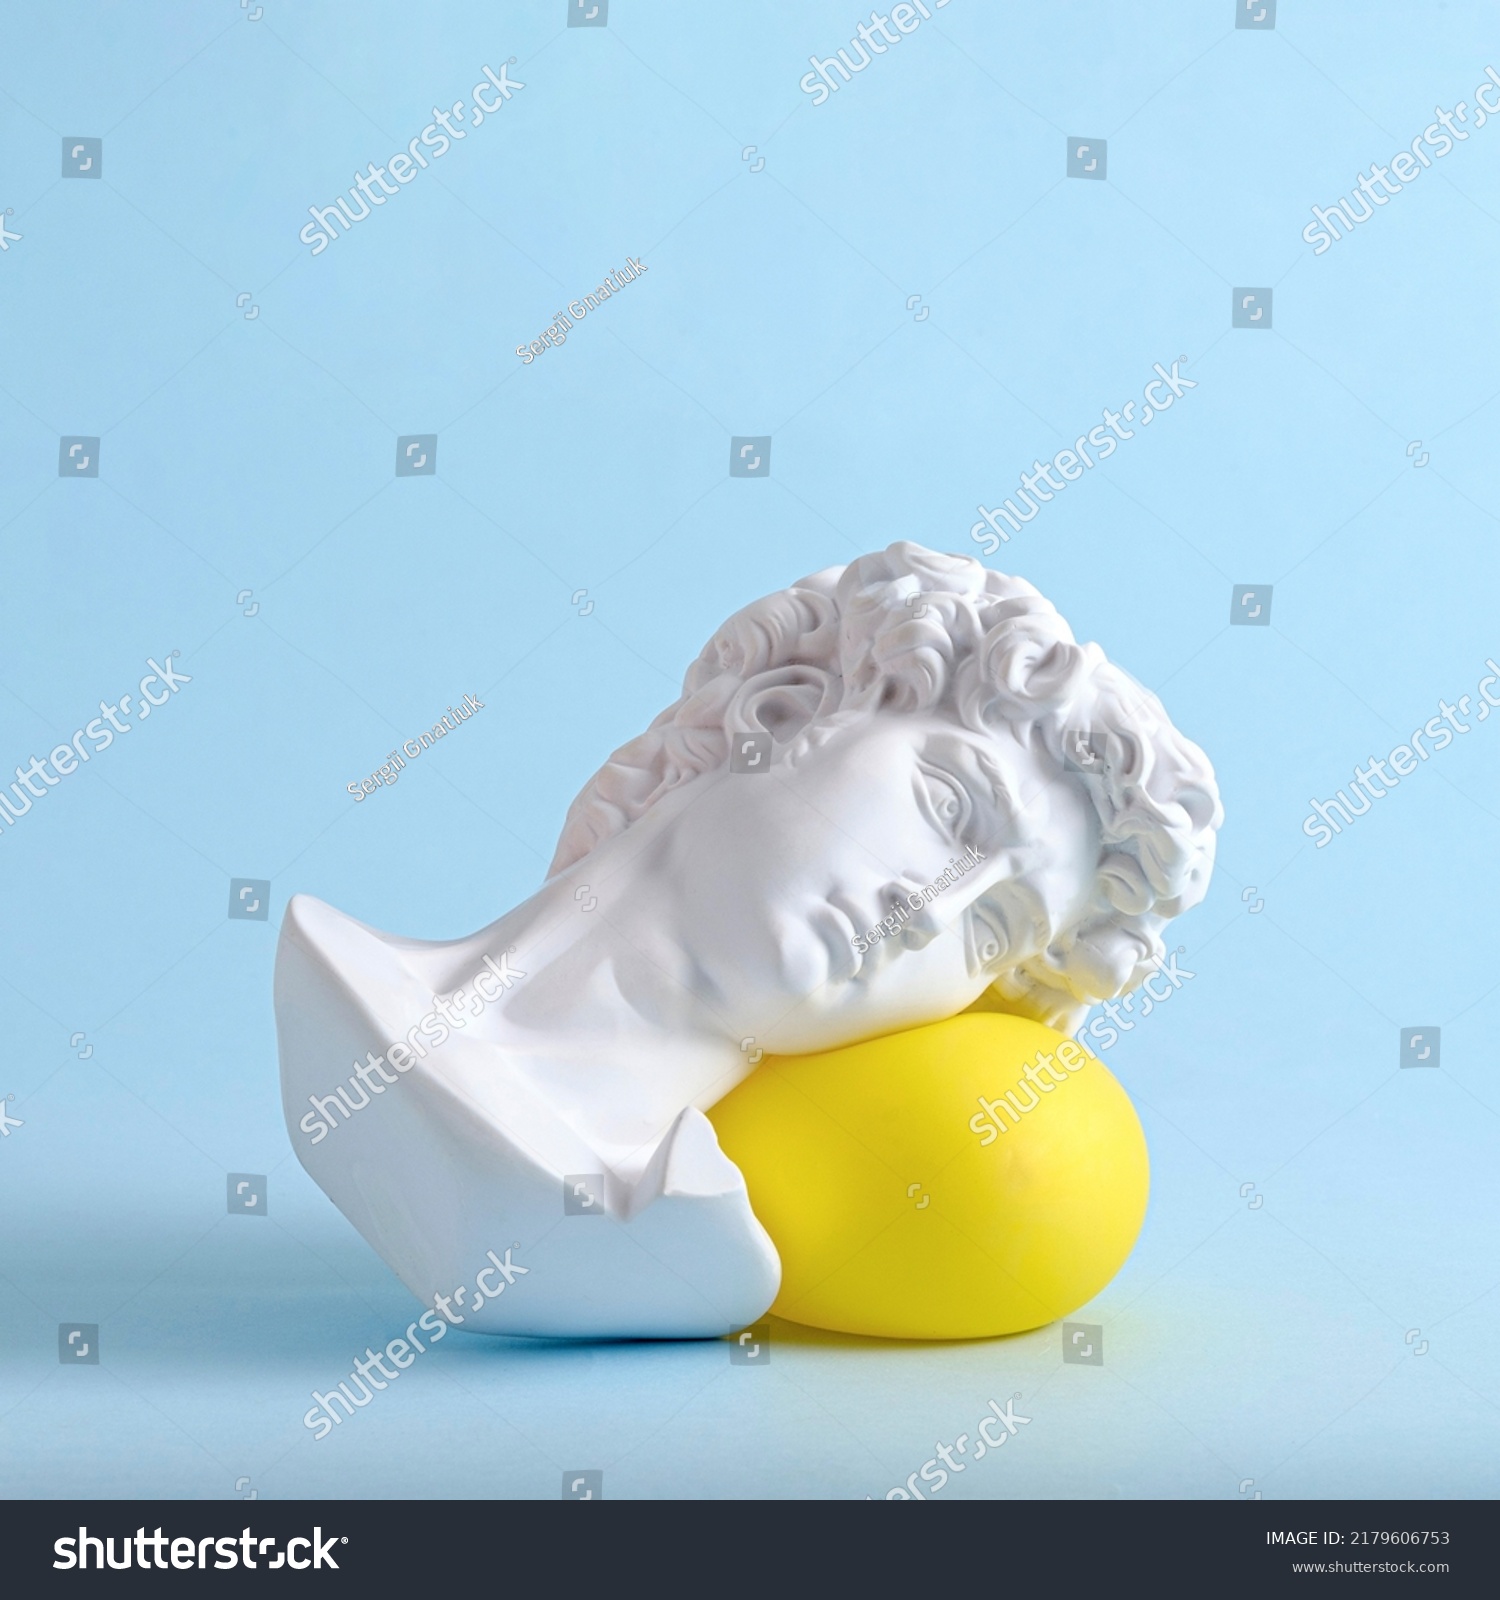 The head and face of David of an antique statue lies on a yellow balloon as a minimal trend concept of vaporwave surreal or sleep. #2179606753